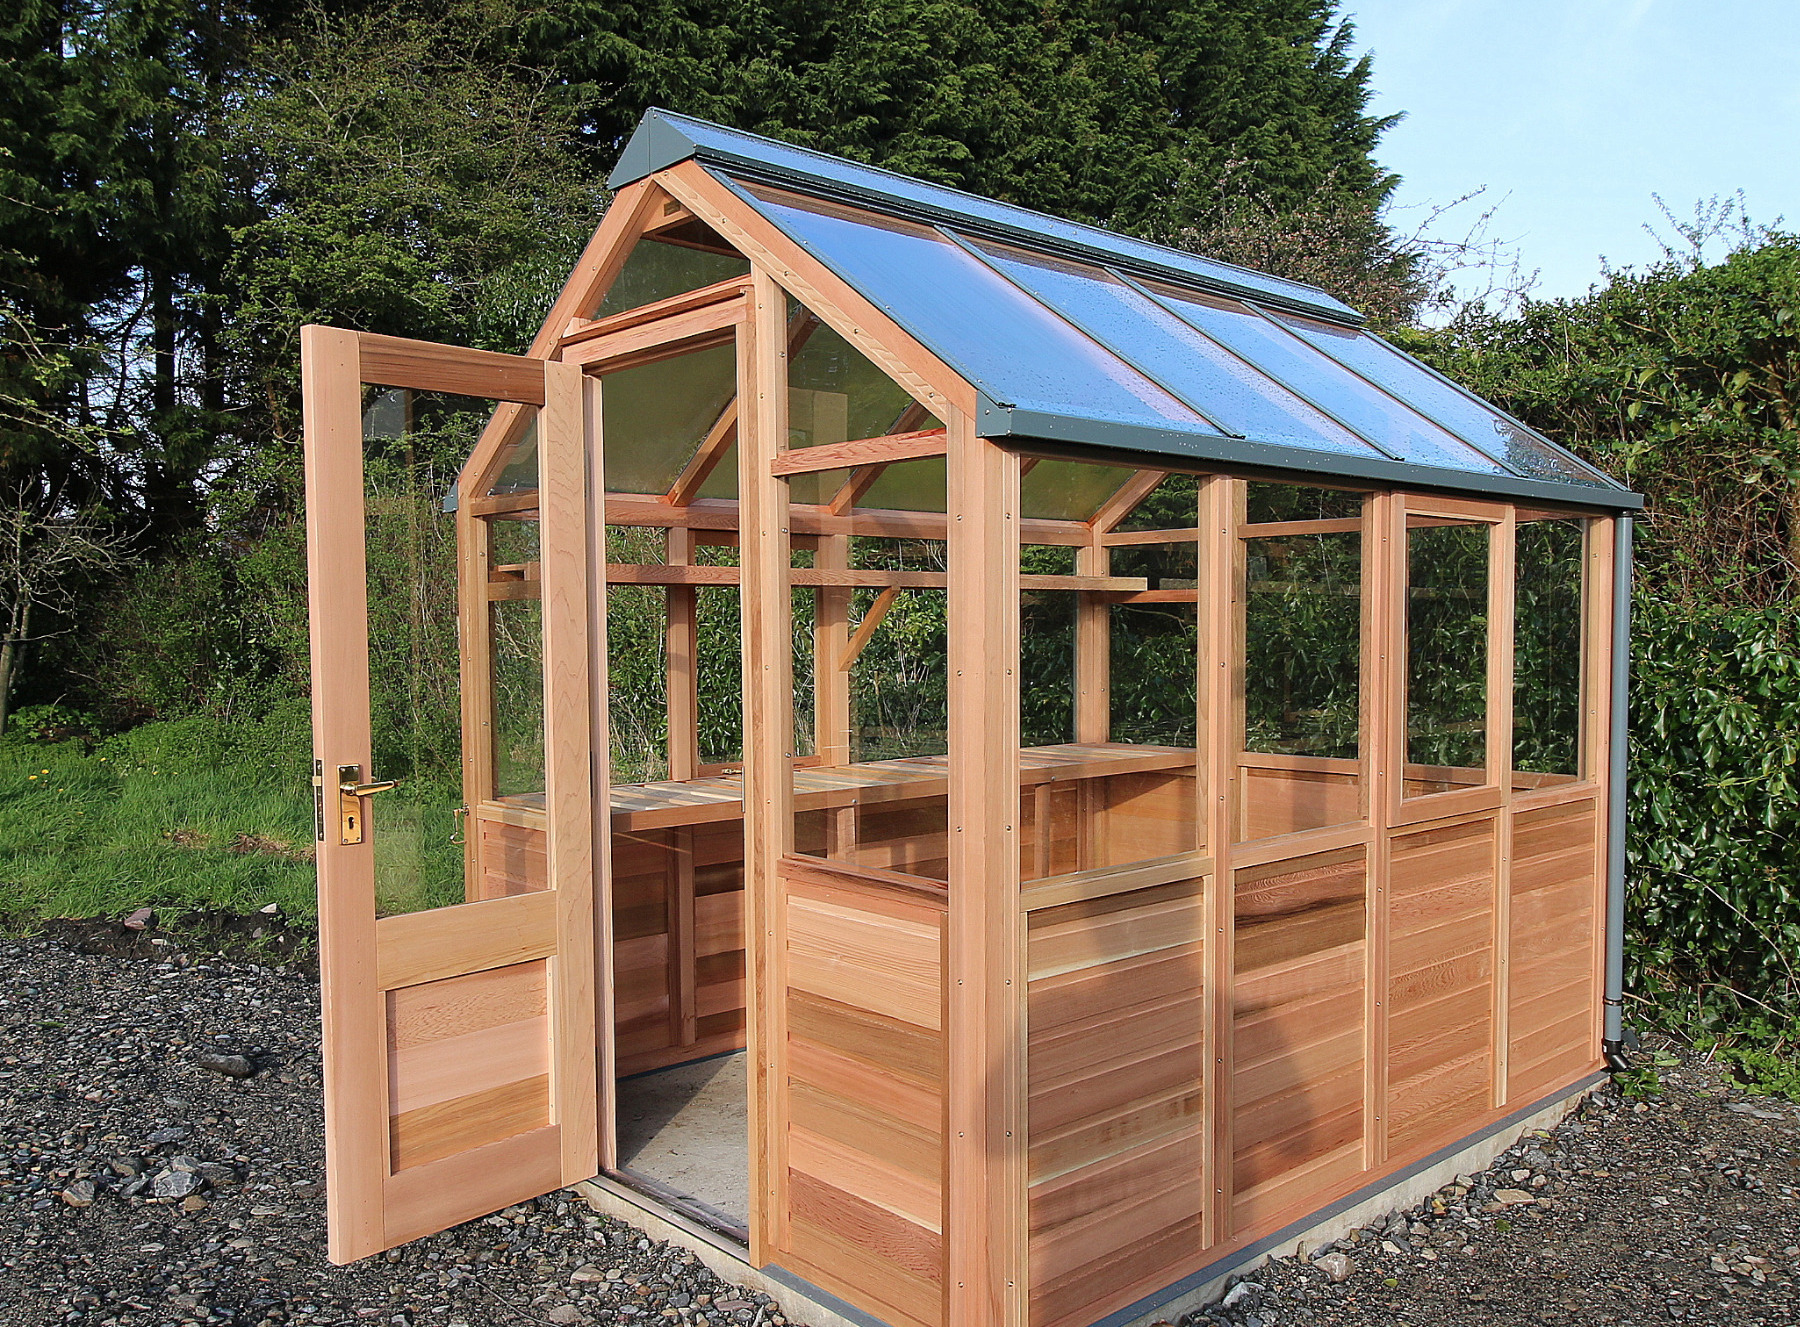 Gabriel Ash Classic Six Greenhouse in Foxford, Co Mayo | the only timber greenhouses endorsed by the RHS | Owen Chubb  087-2306128